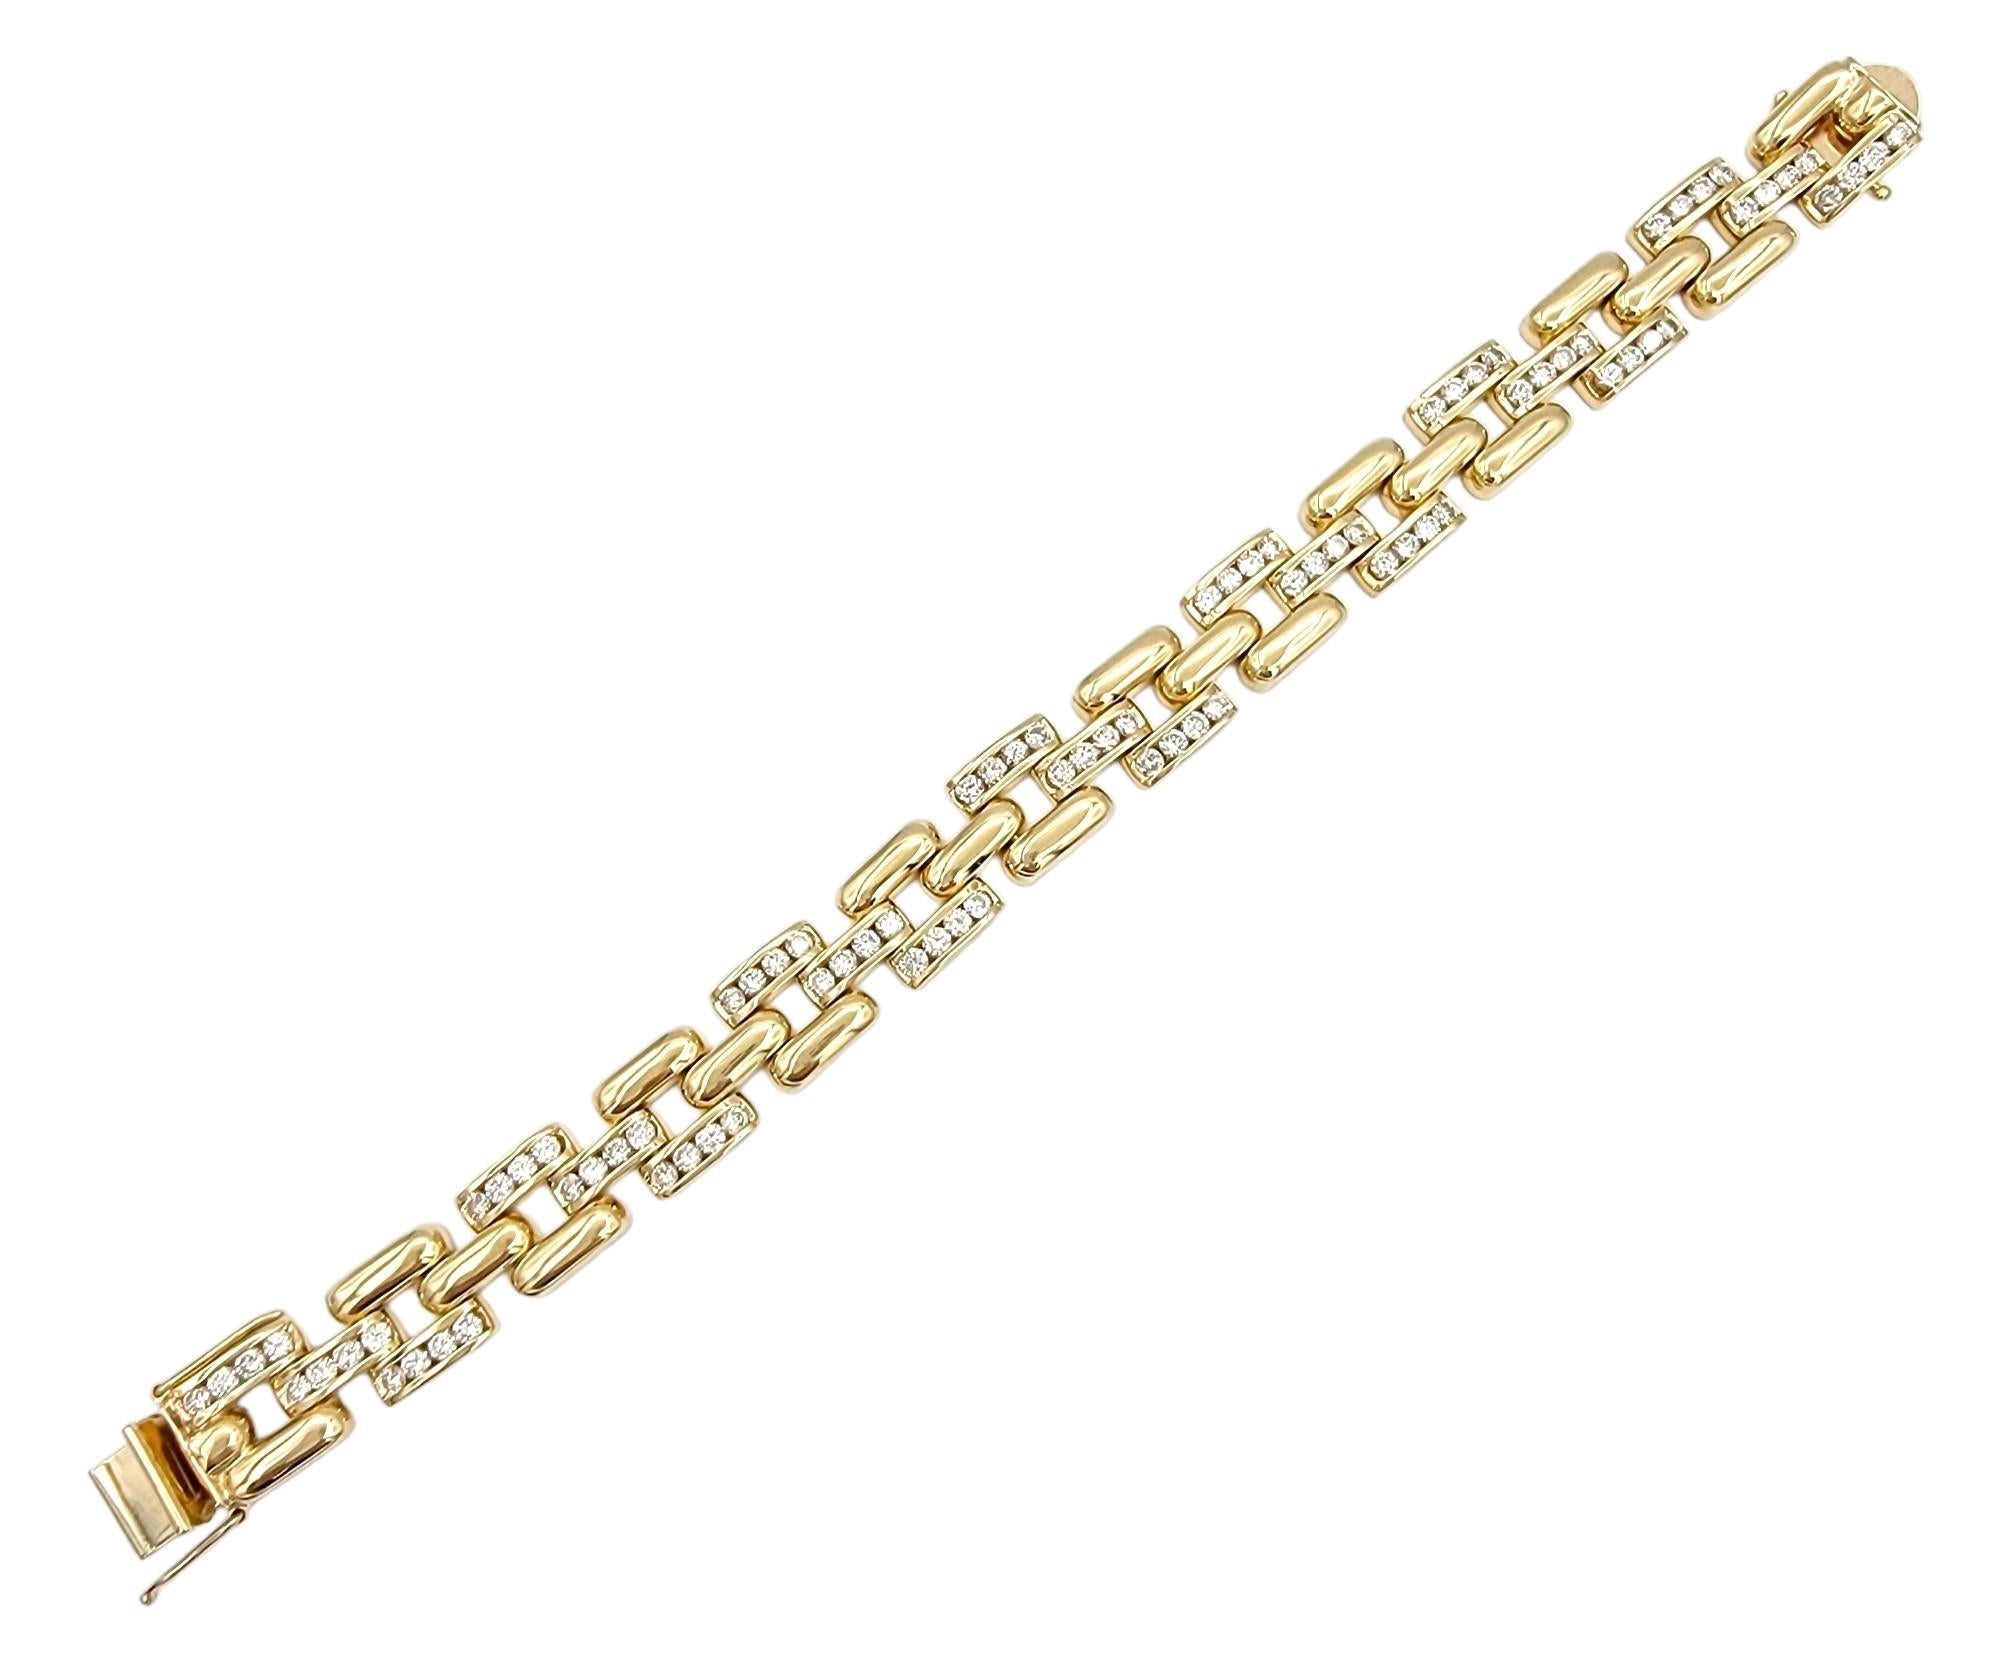 Contemporary 4.50 Carat Total Round Diamond Panther Link Bracelet Set in 14 Karat Yellow Gold For Sale